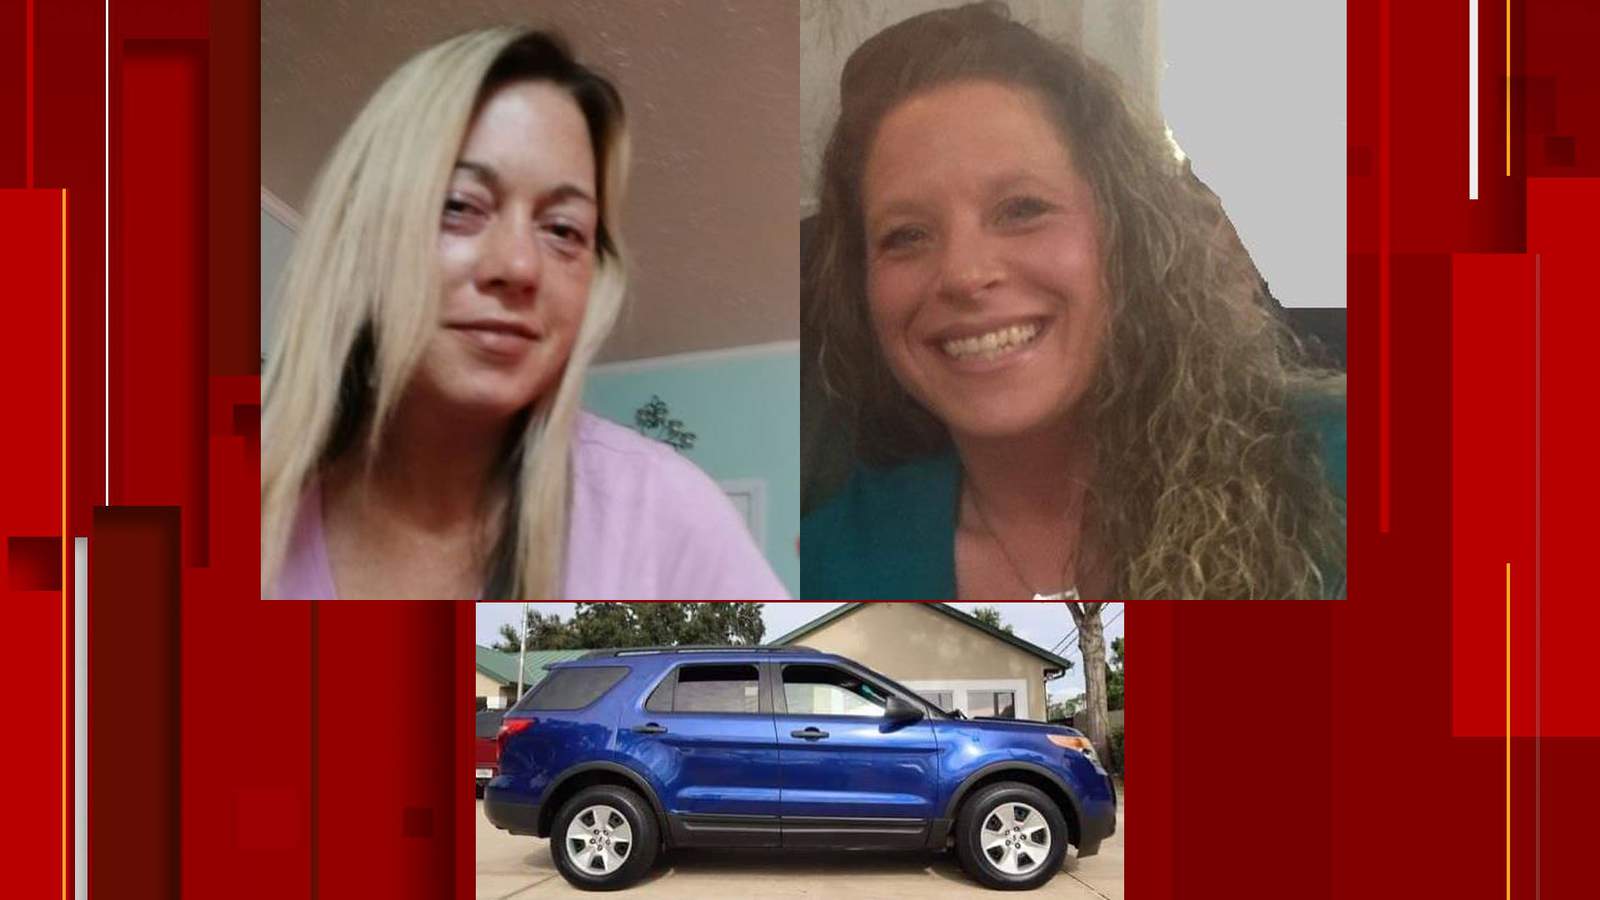 Buena Vista Police Searching For Two Missing Women